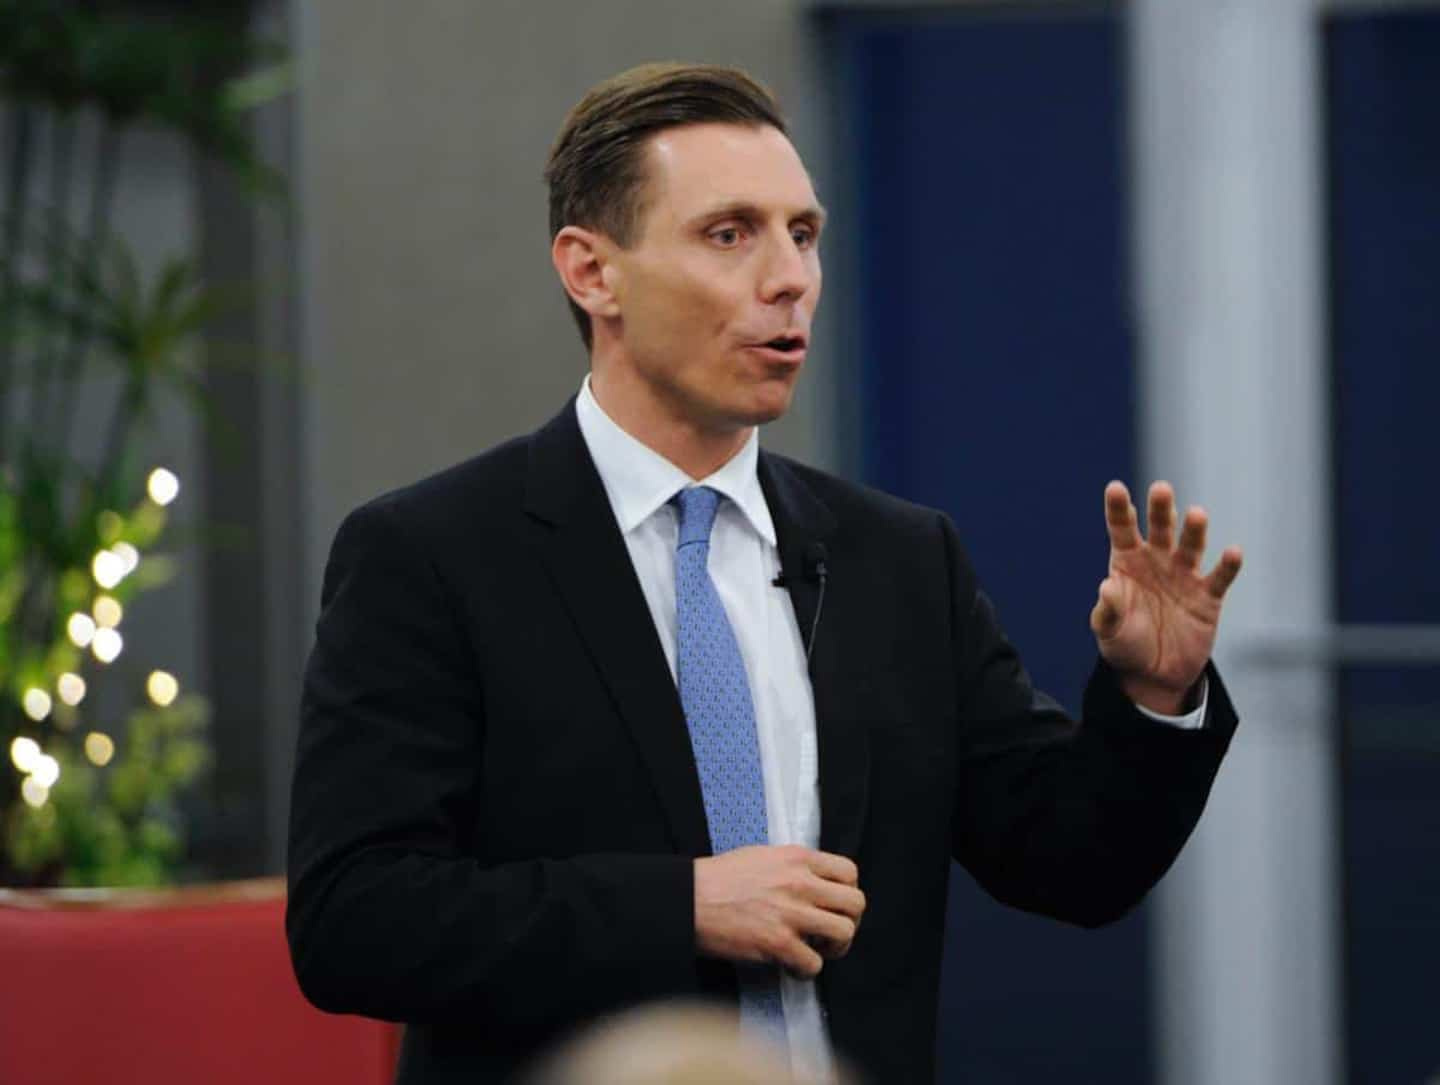 CPC leadership: Patrick Brown appeals his disqualification